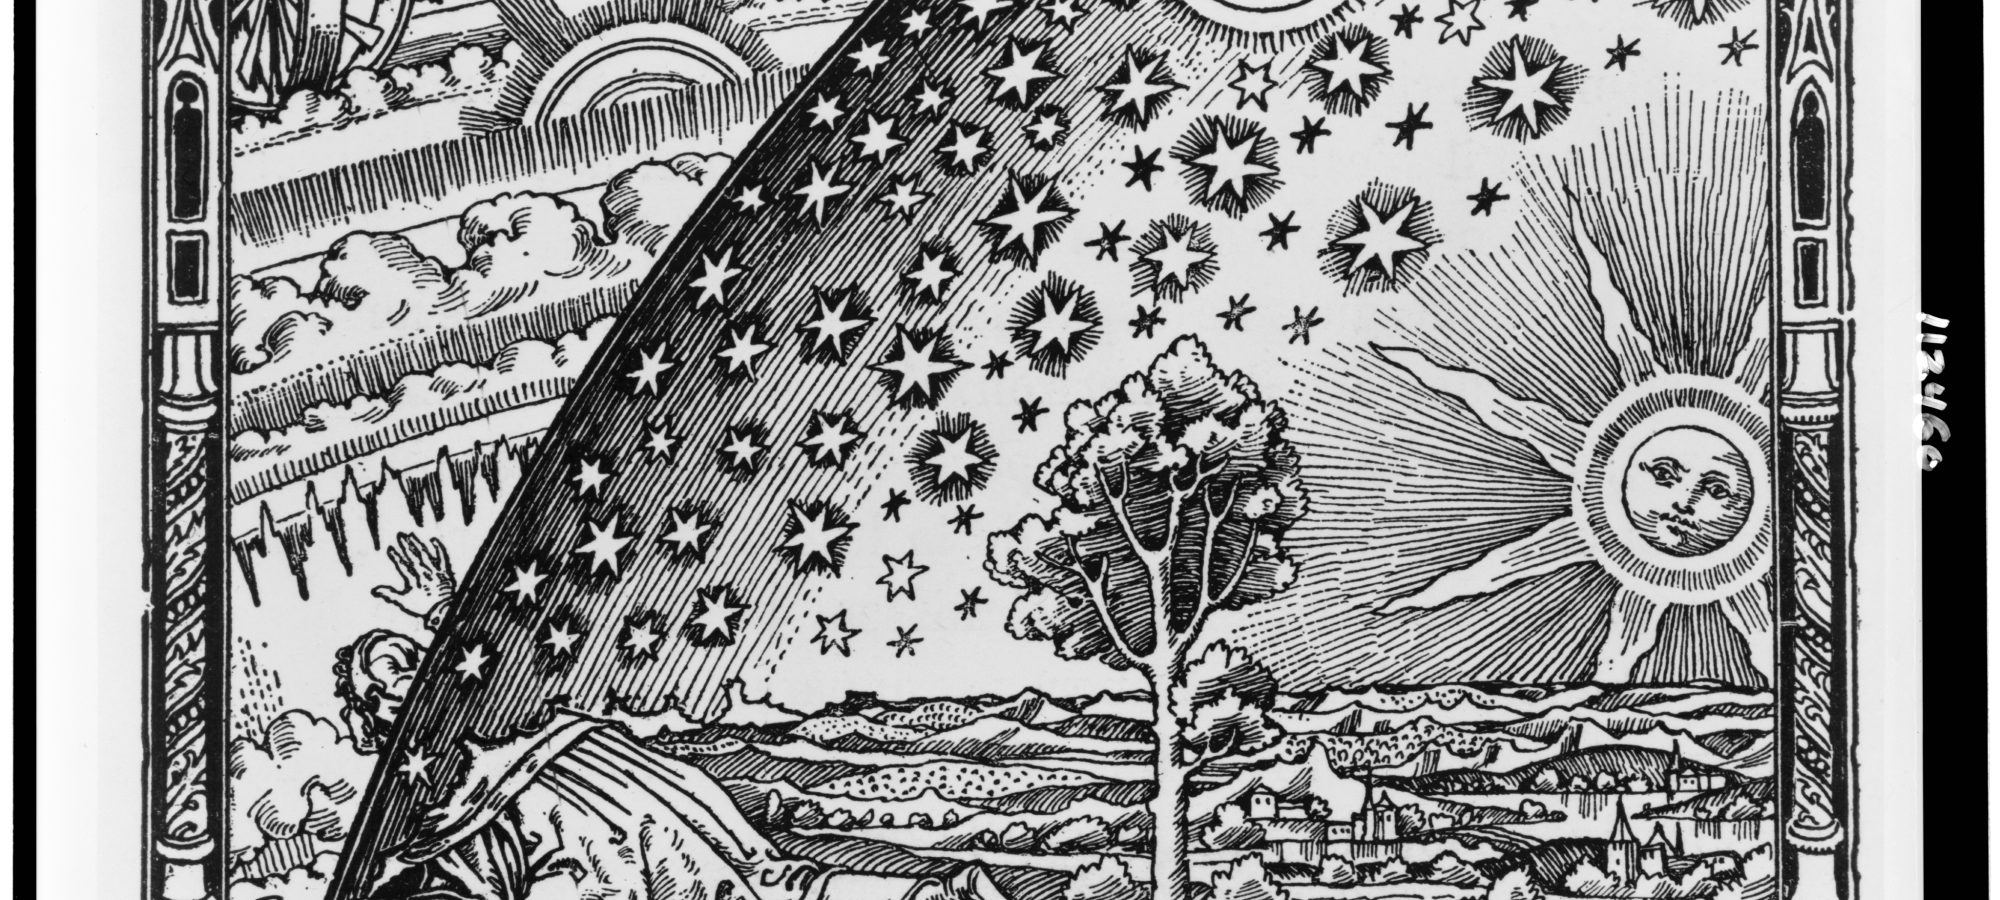 Print of sun, moon and stars inside a dome overlooking the land